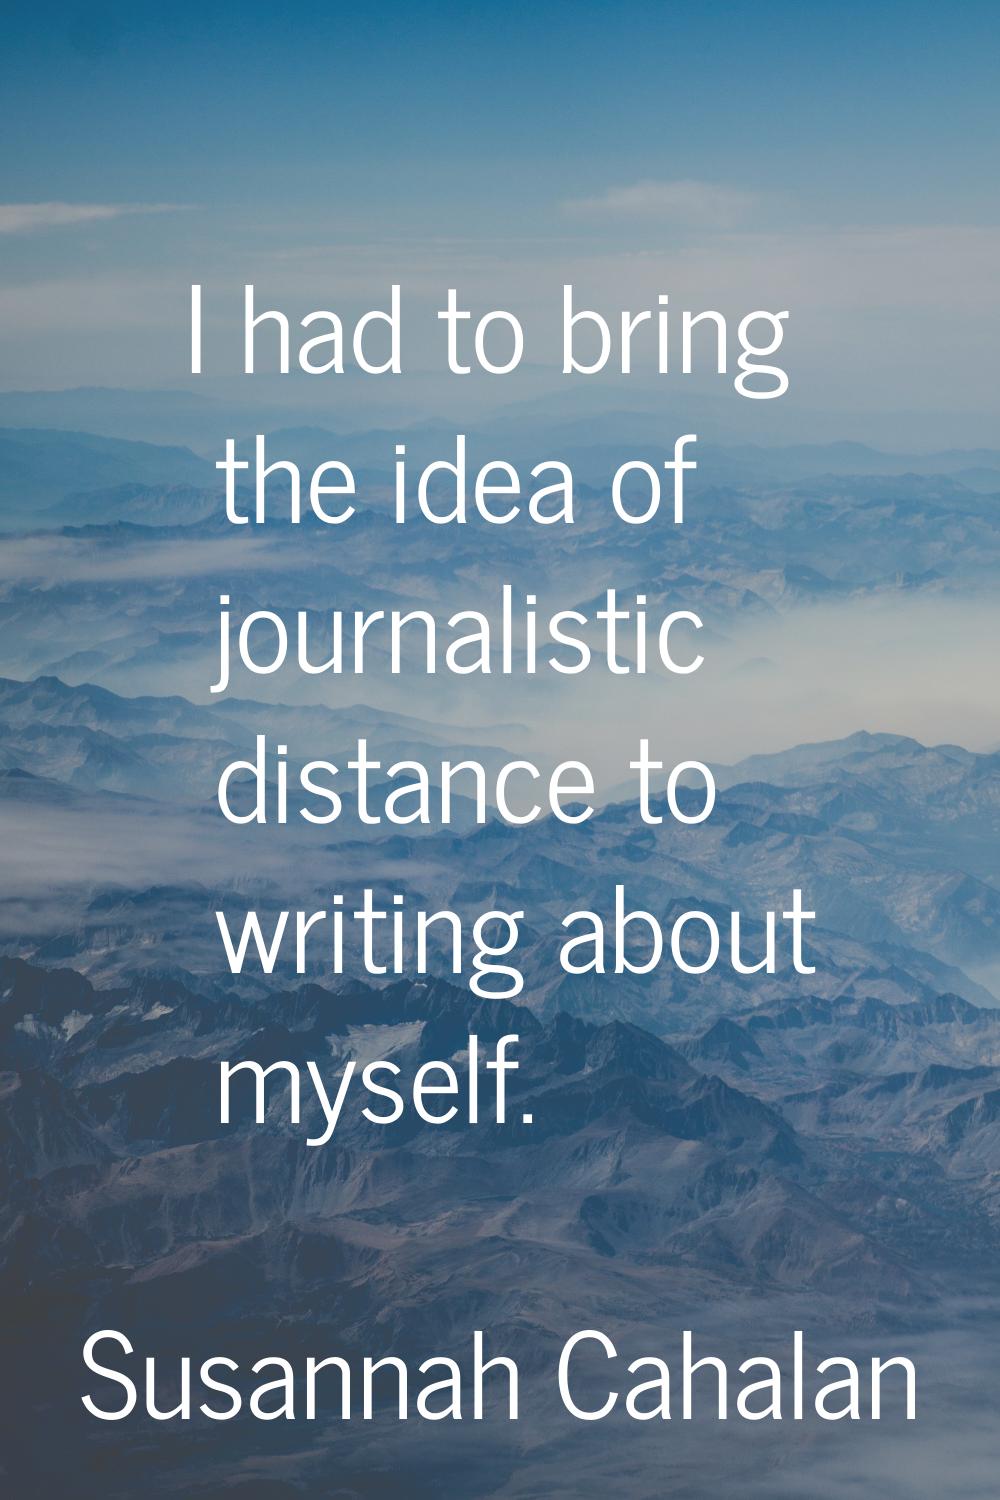 I had to bring the idea of journalistic distance to writing about myself.